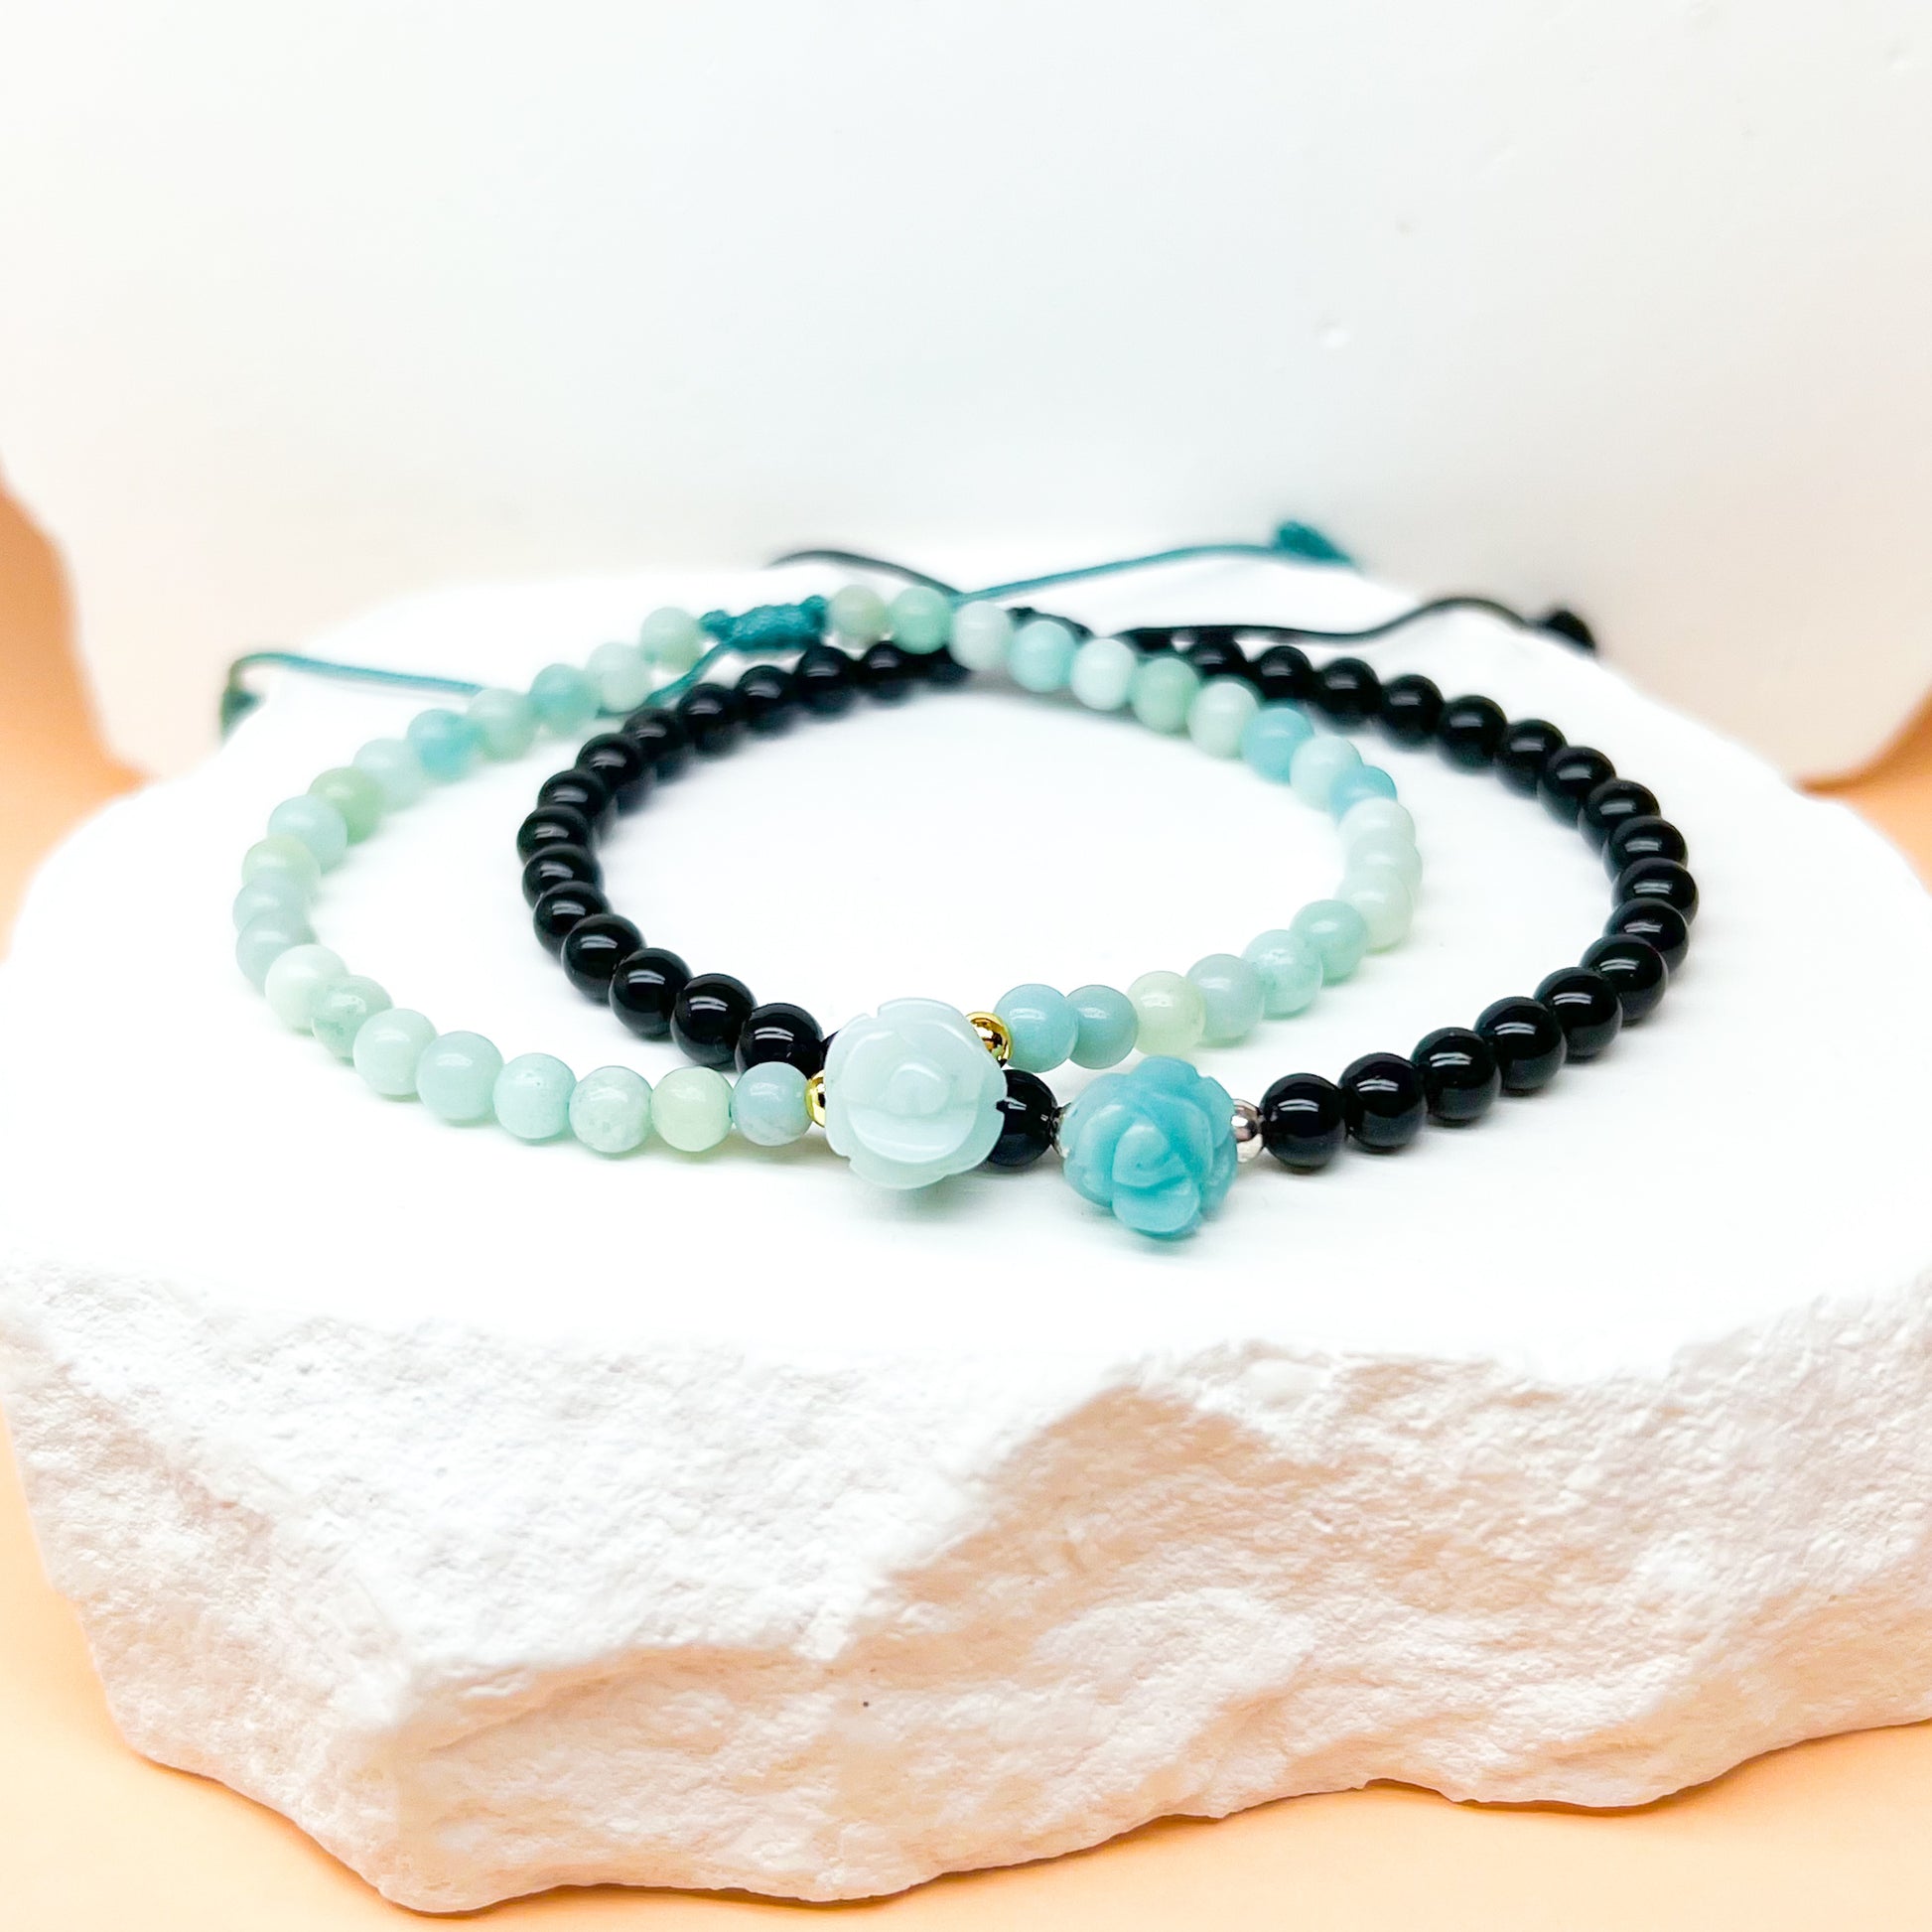 Amazonite and onyx bracelet for healing and protection